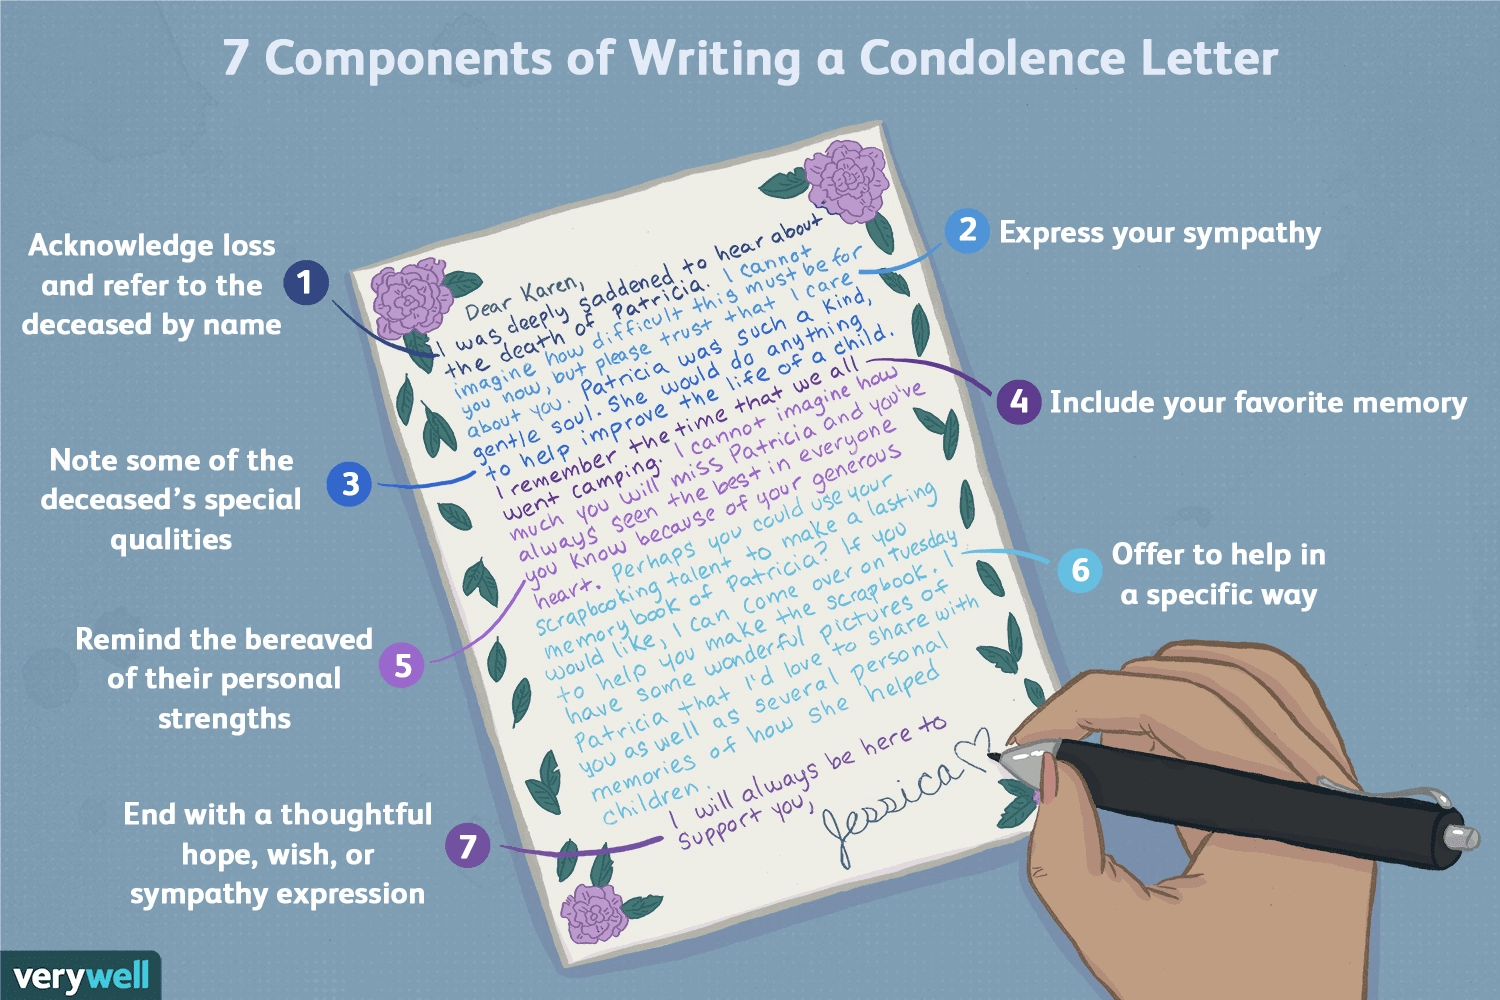 How to Write a Condolence Letter